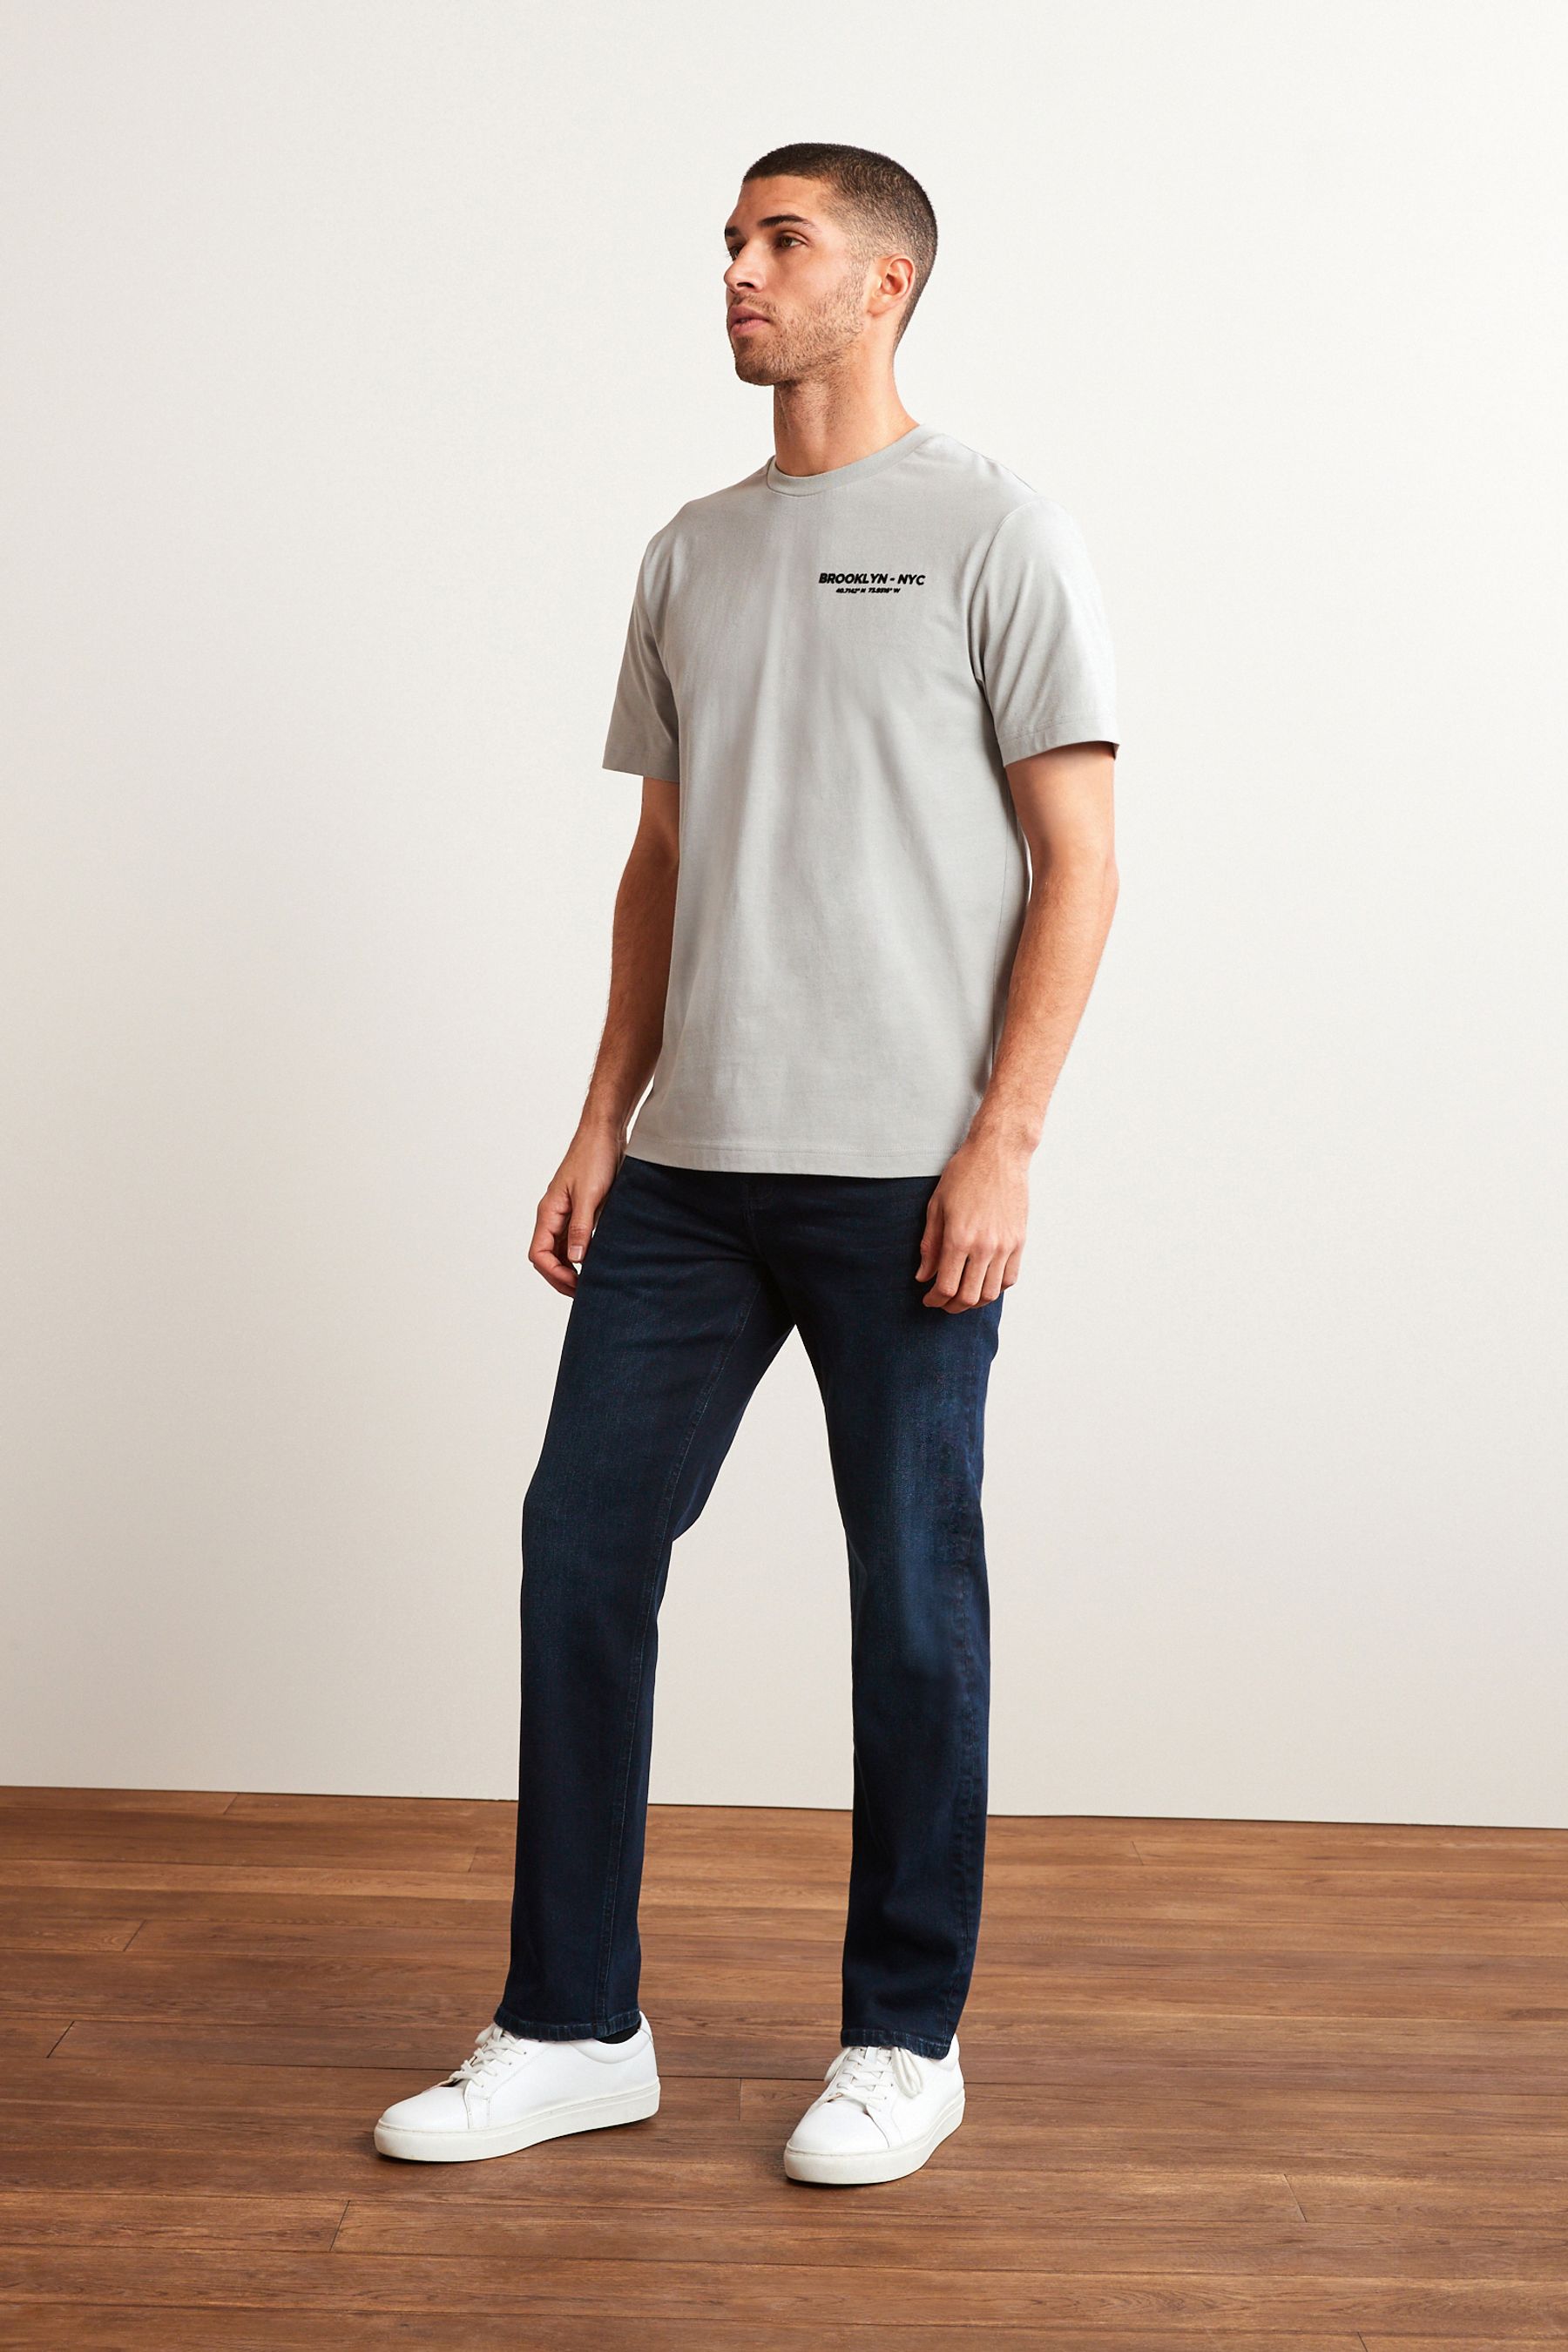 U25454s Relaxed Fit